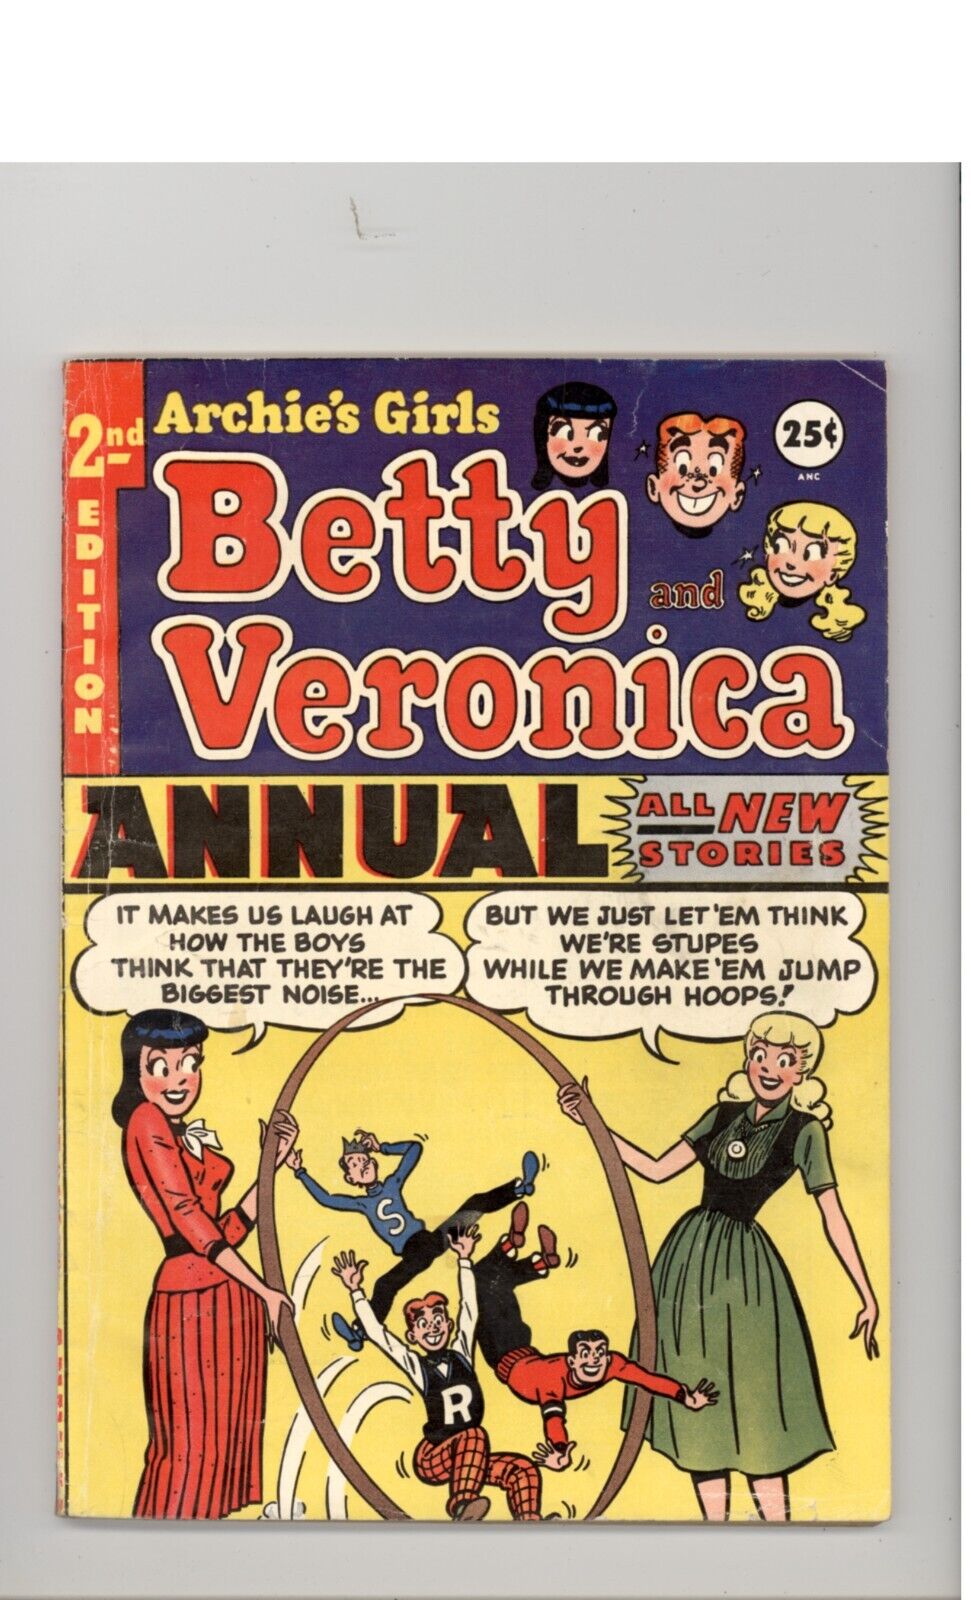 Archie's Girls Betty and Veronica Annual #2 VG+ 1953